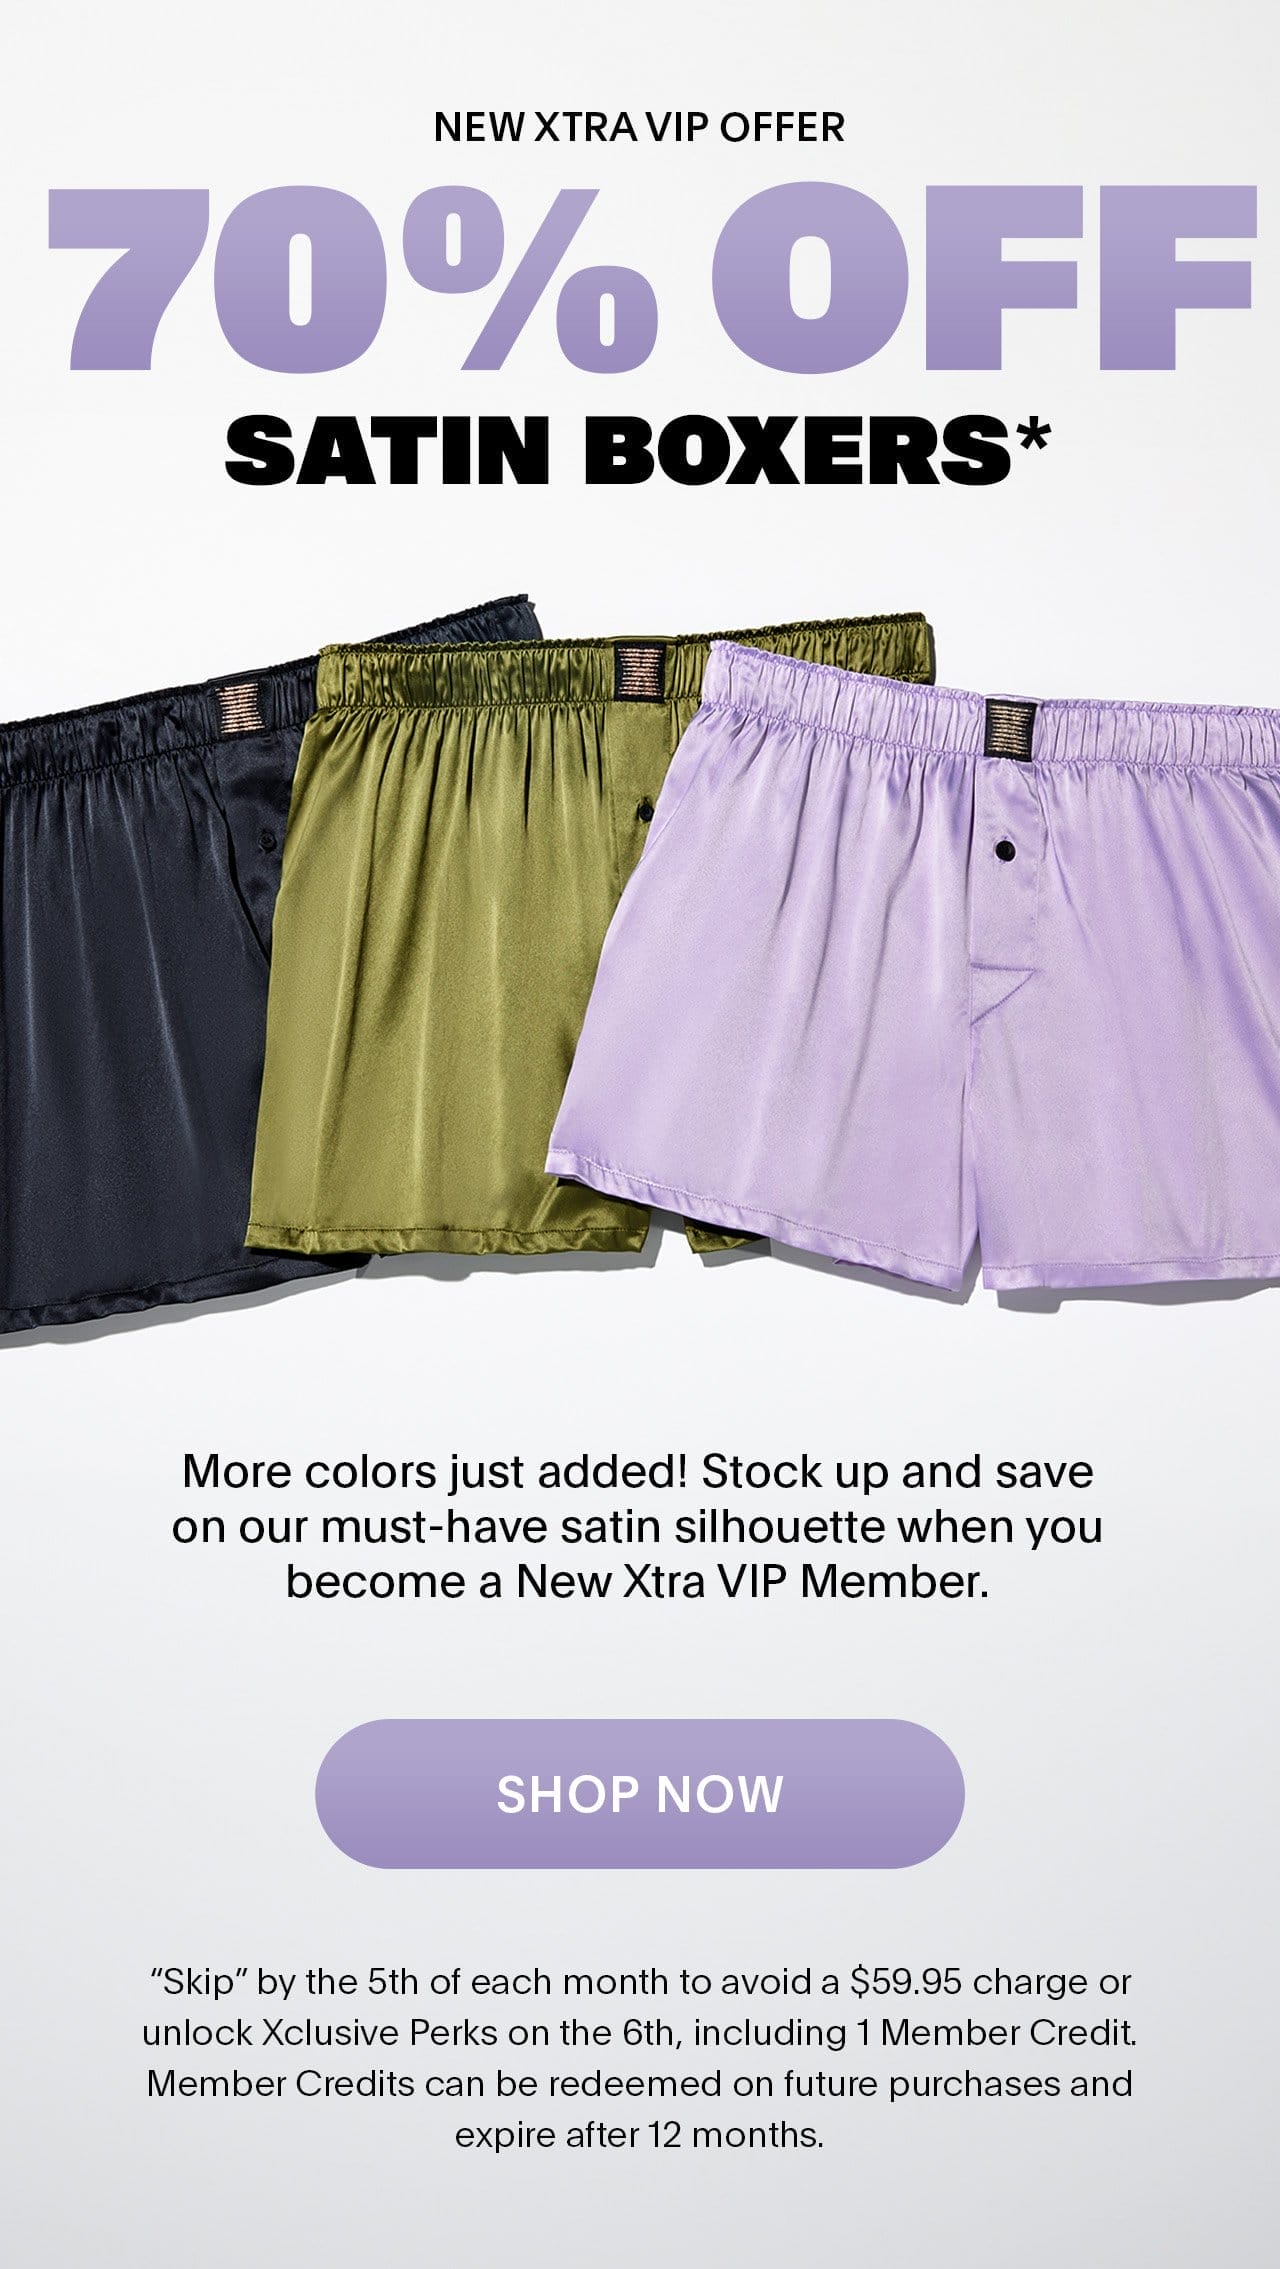 New Xtra VIP Offer 70% OFF Satin Boxers* More colors just added! Stock up and save on our must-have satin silhouette when you become a New Xtra VIP Member. 